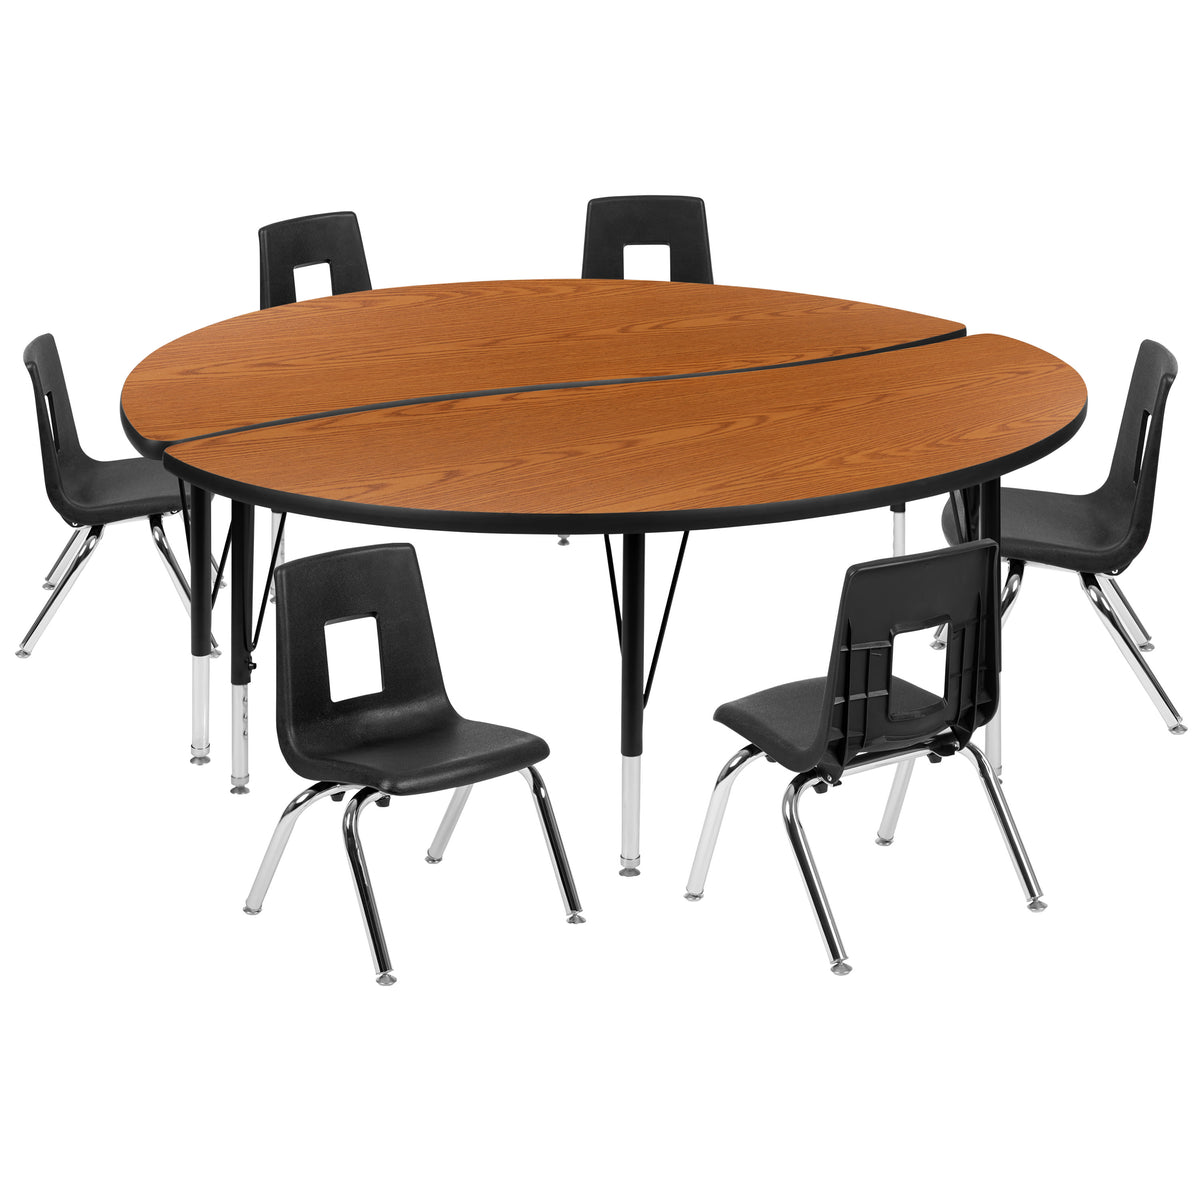 Oak |#| 60inch Circle Wave Activity Table Set with 12inch Student Stack Chairs, Oak/Black